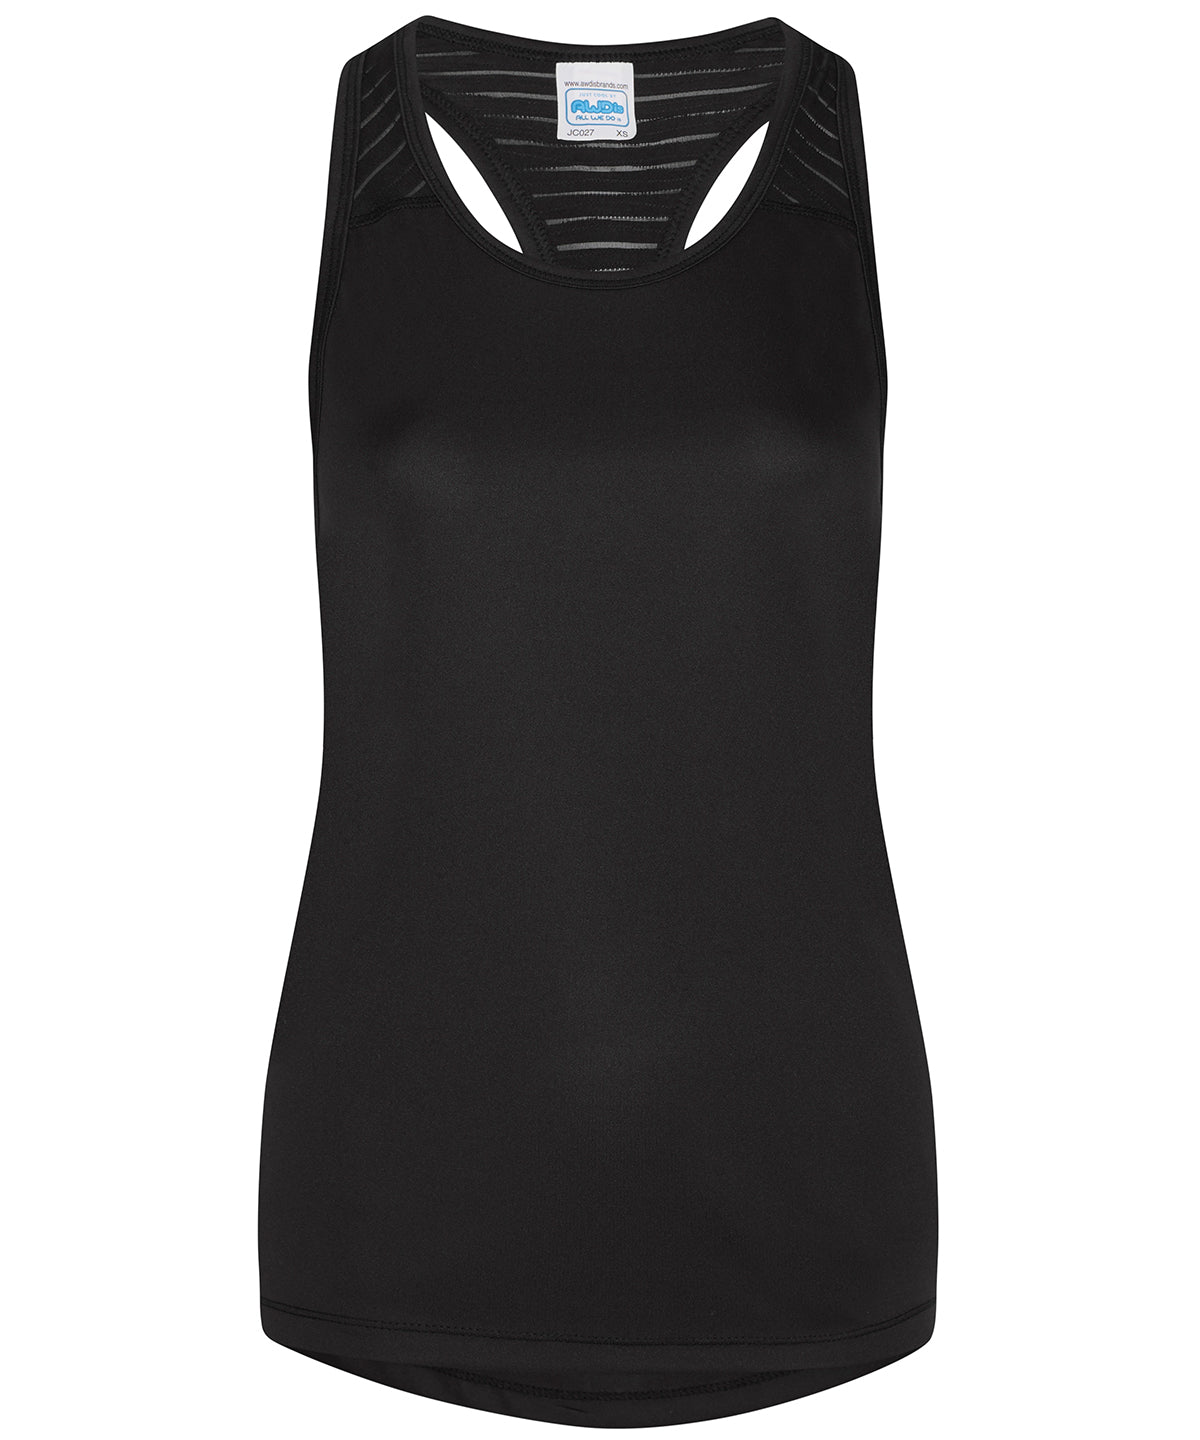 Personalised Vests - White AWDis Just Cool Women's cool smooth workout vest